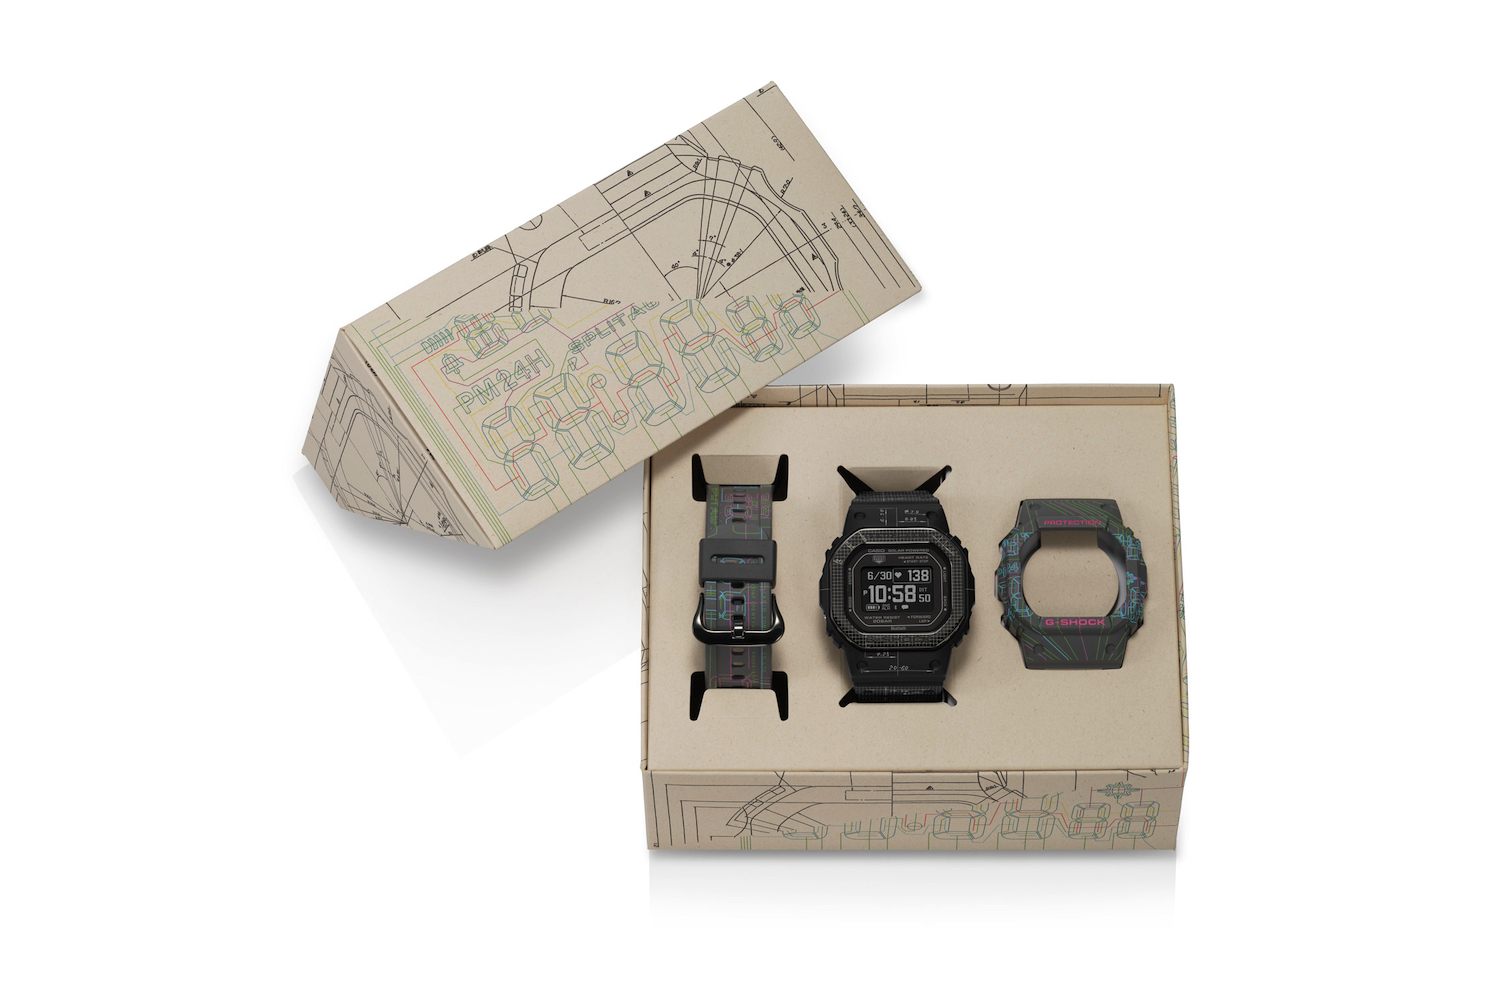 The box for the special Casio G-Shock DW-H5600.